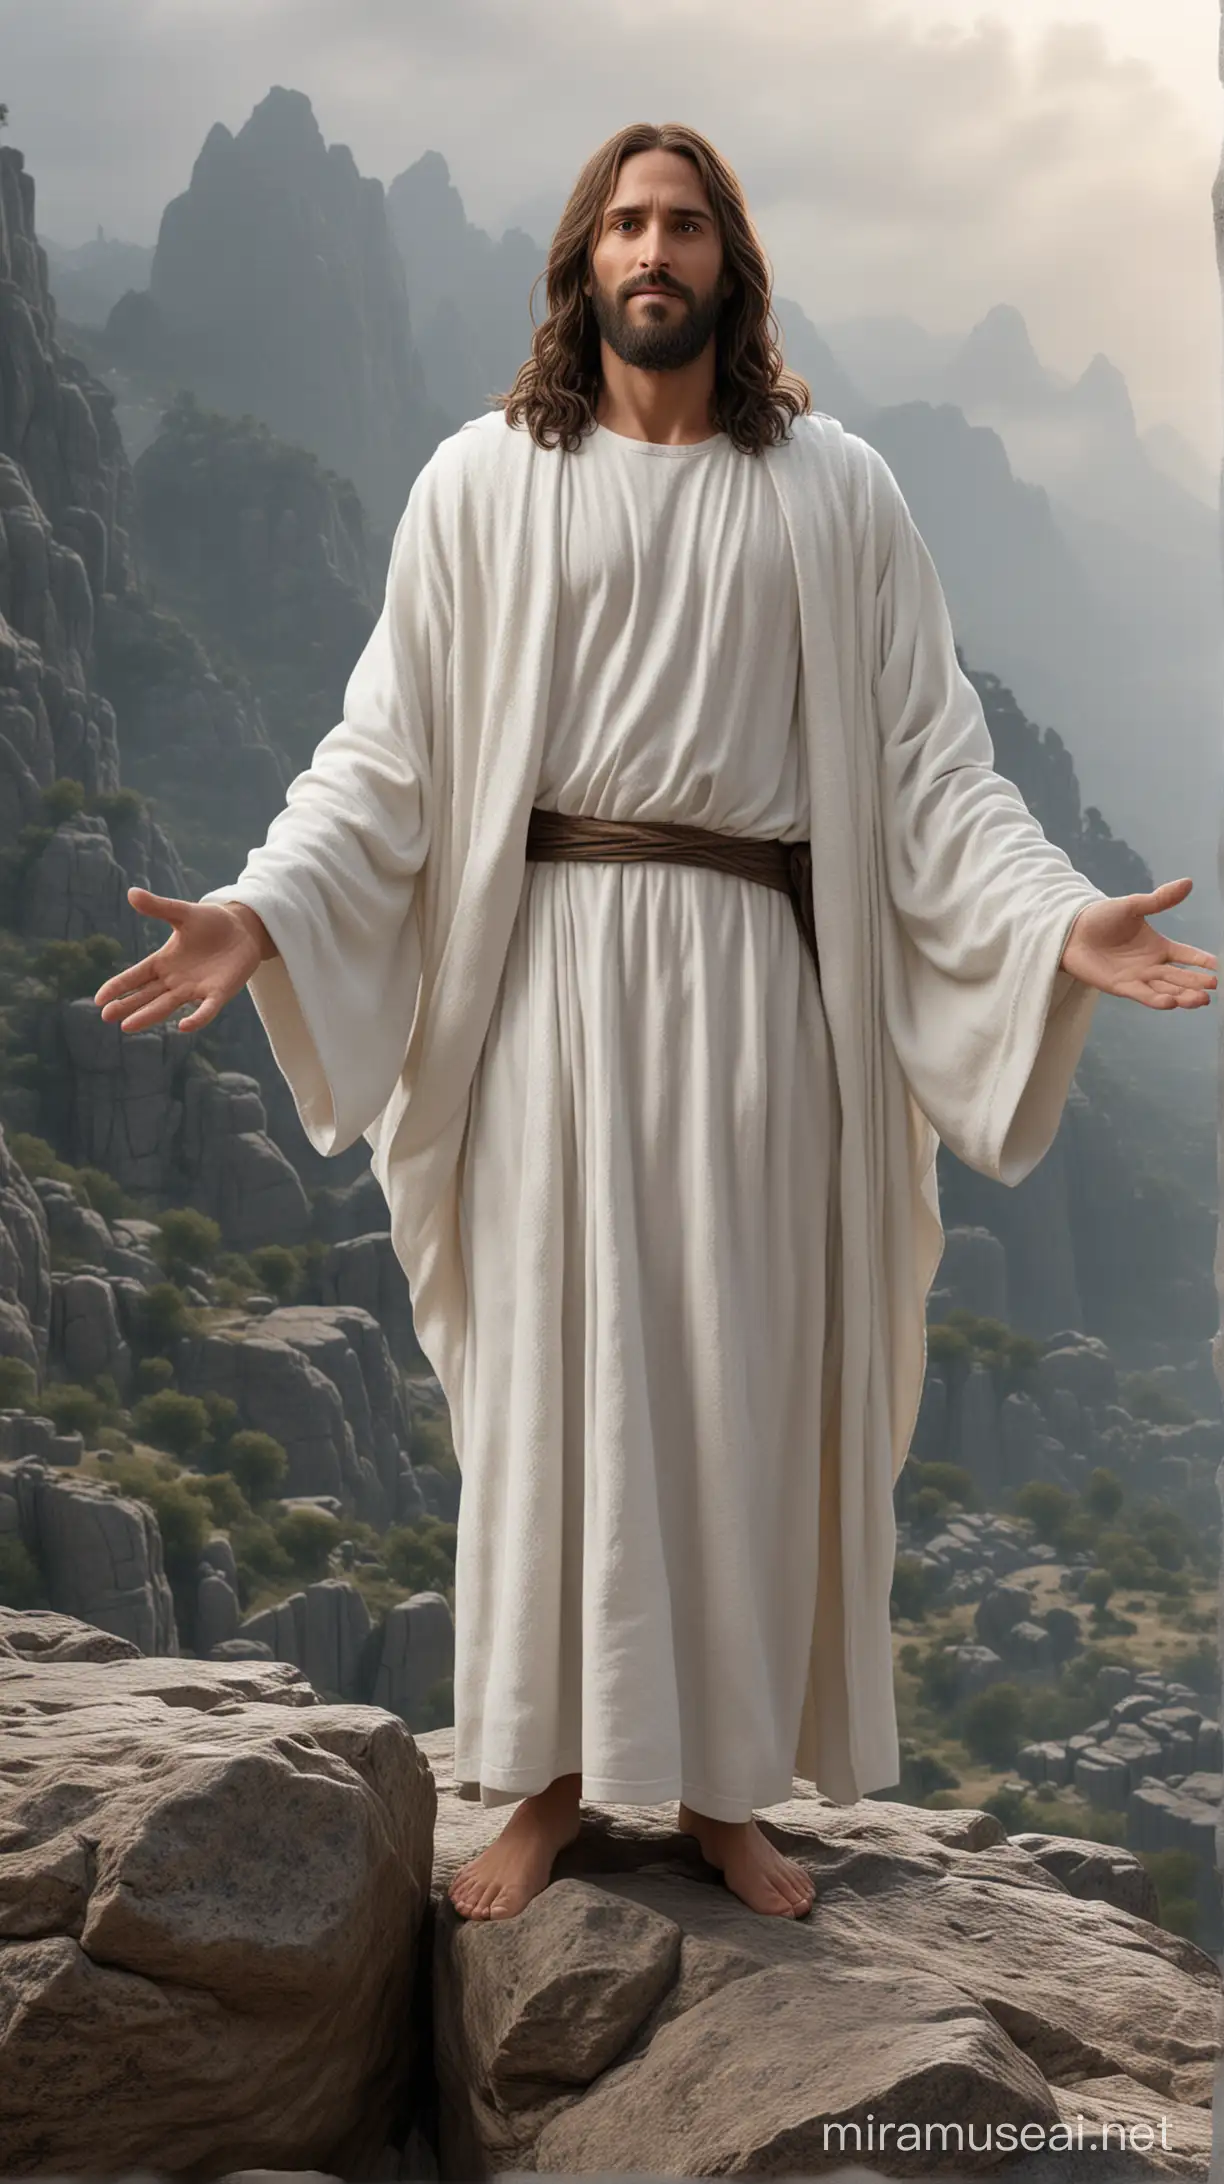 HyperRealistic Jesus Standing on High Rock in White Robe with Warm Welcoming Smile